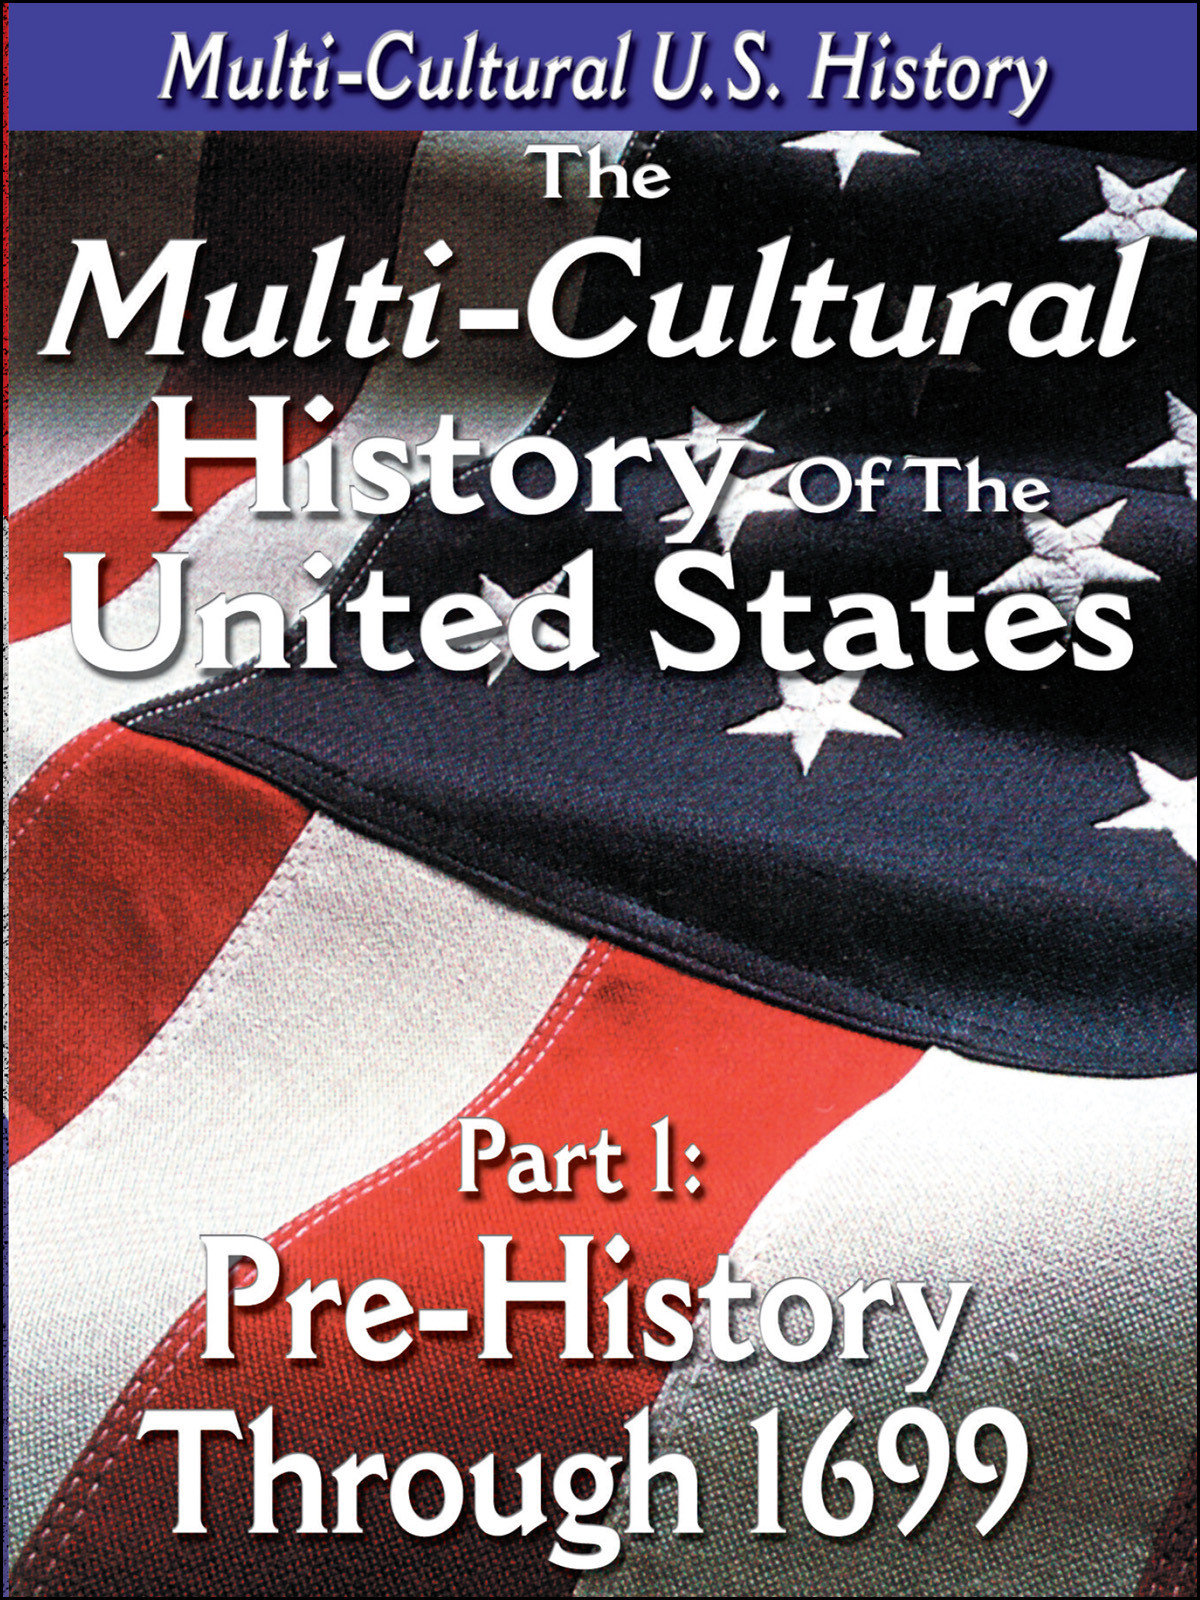 L917 - The History of the United States Pre-History through 1699